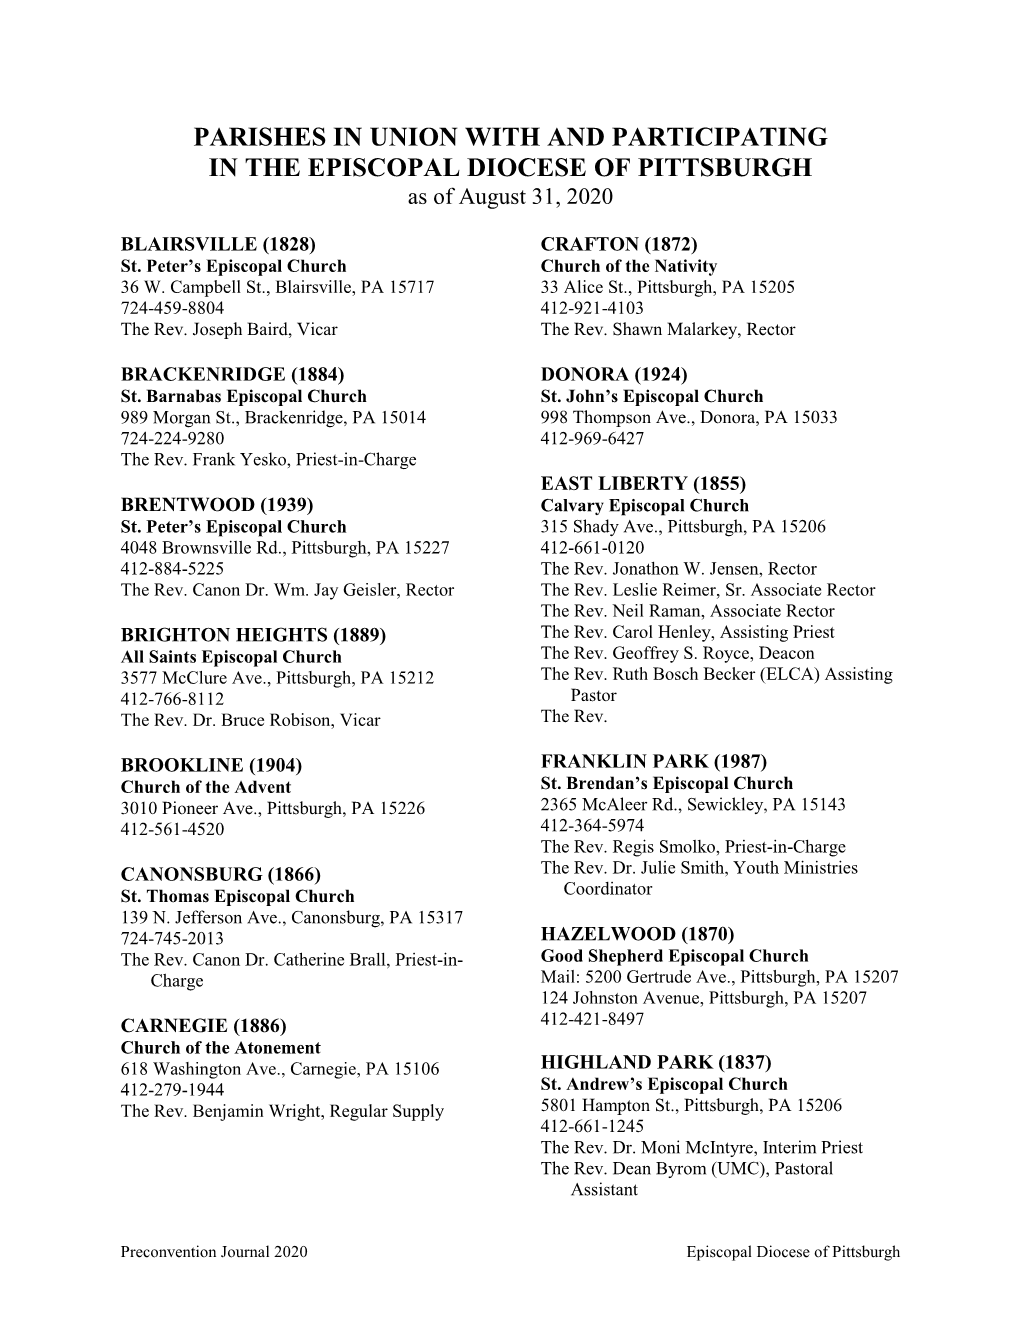 PARISHES in UNION with and PARTICIPATING in the EPISCOPAL DIOCESE of PITTSBURGH As of August 31, 2020